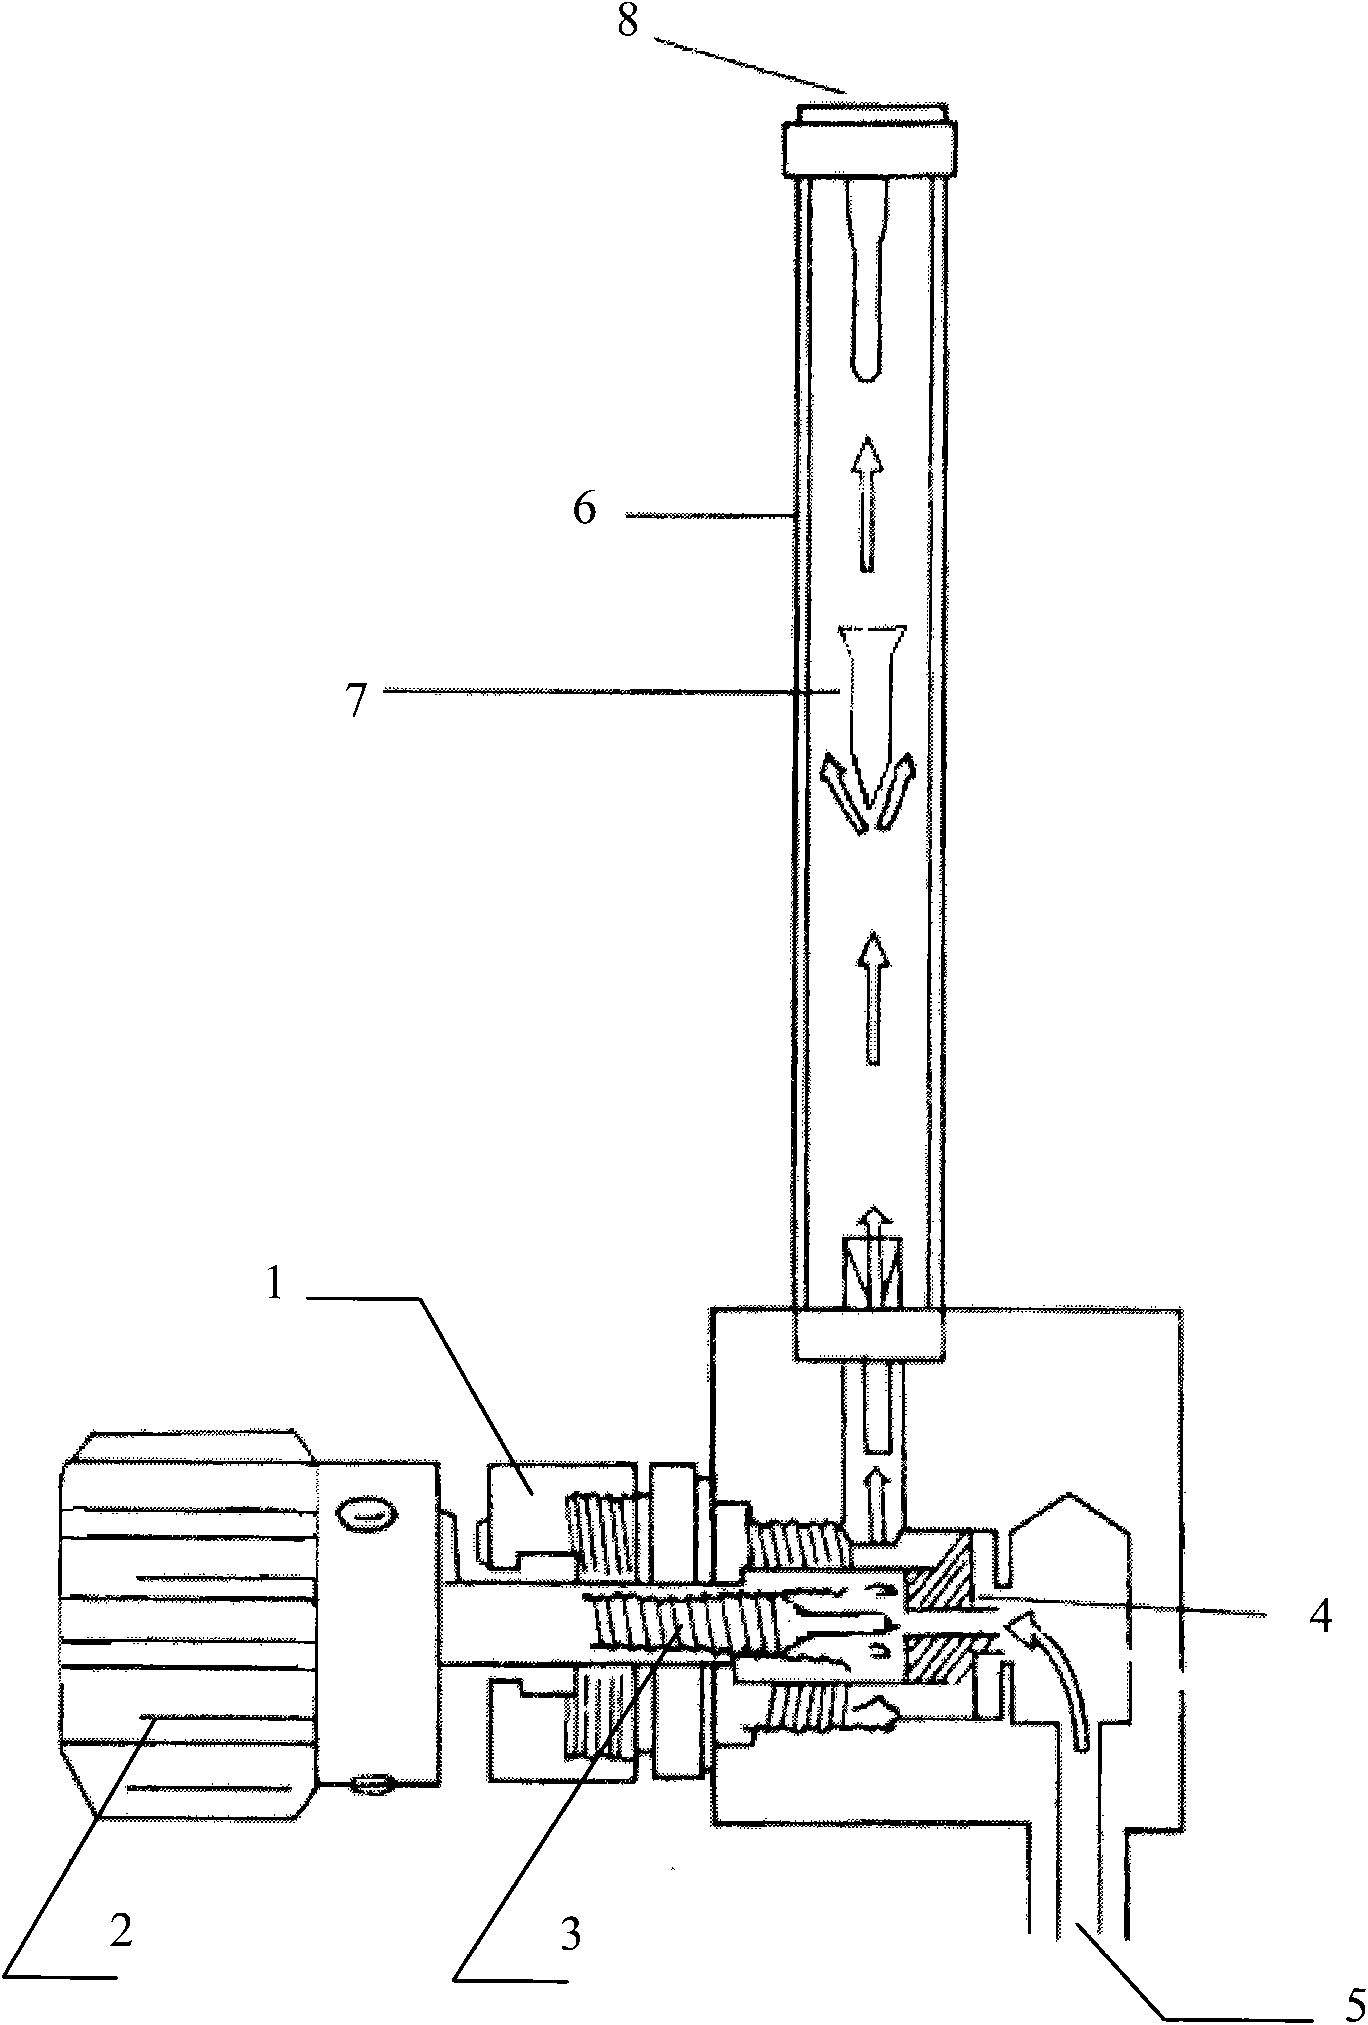 Rotermeter linkage device with synchronous belt